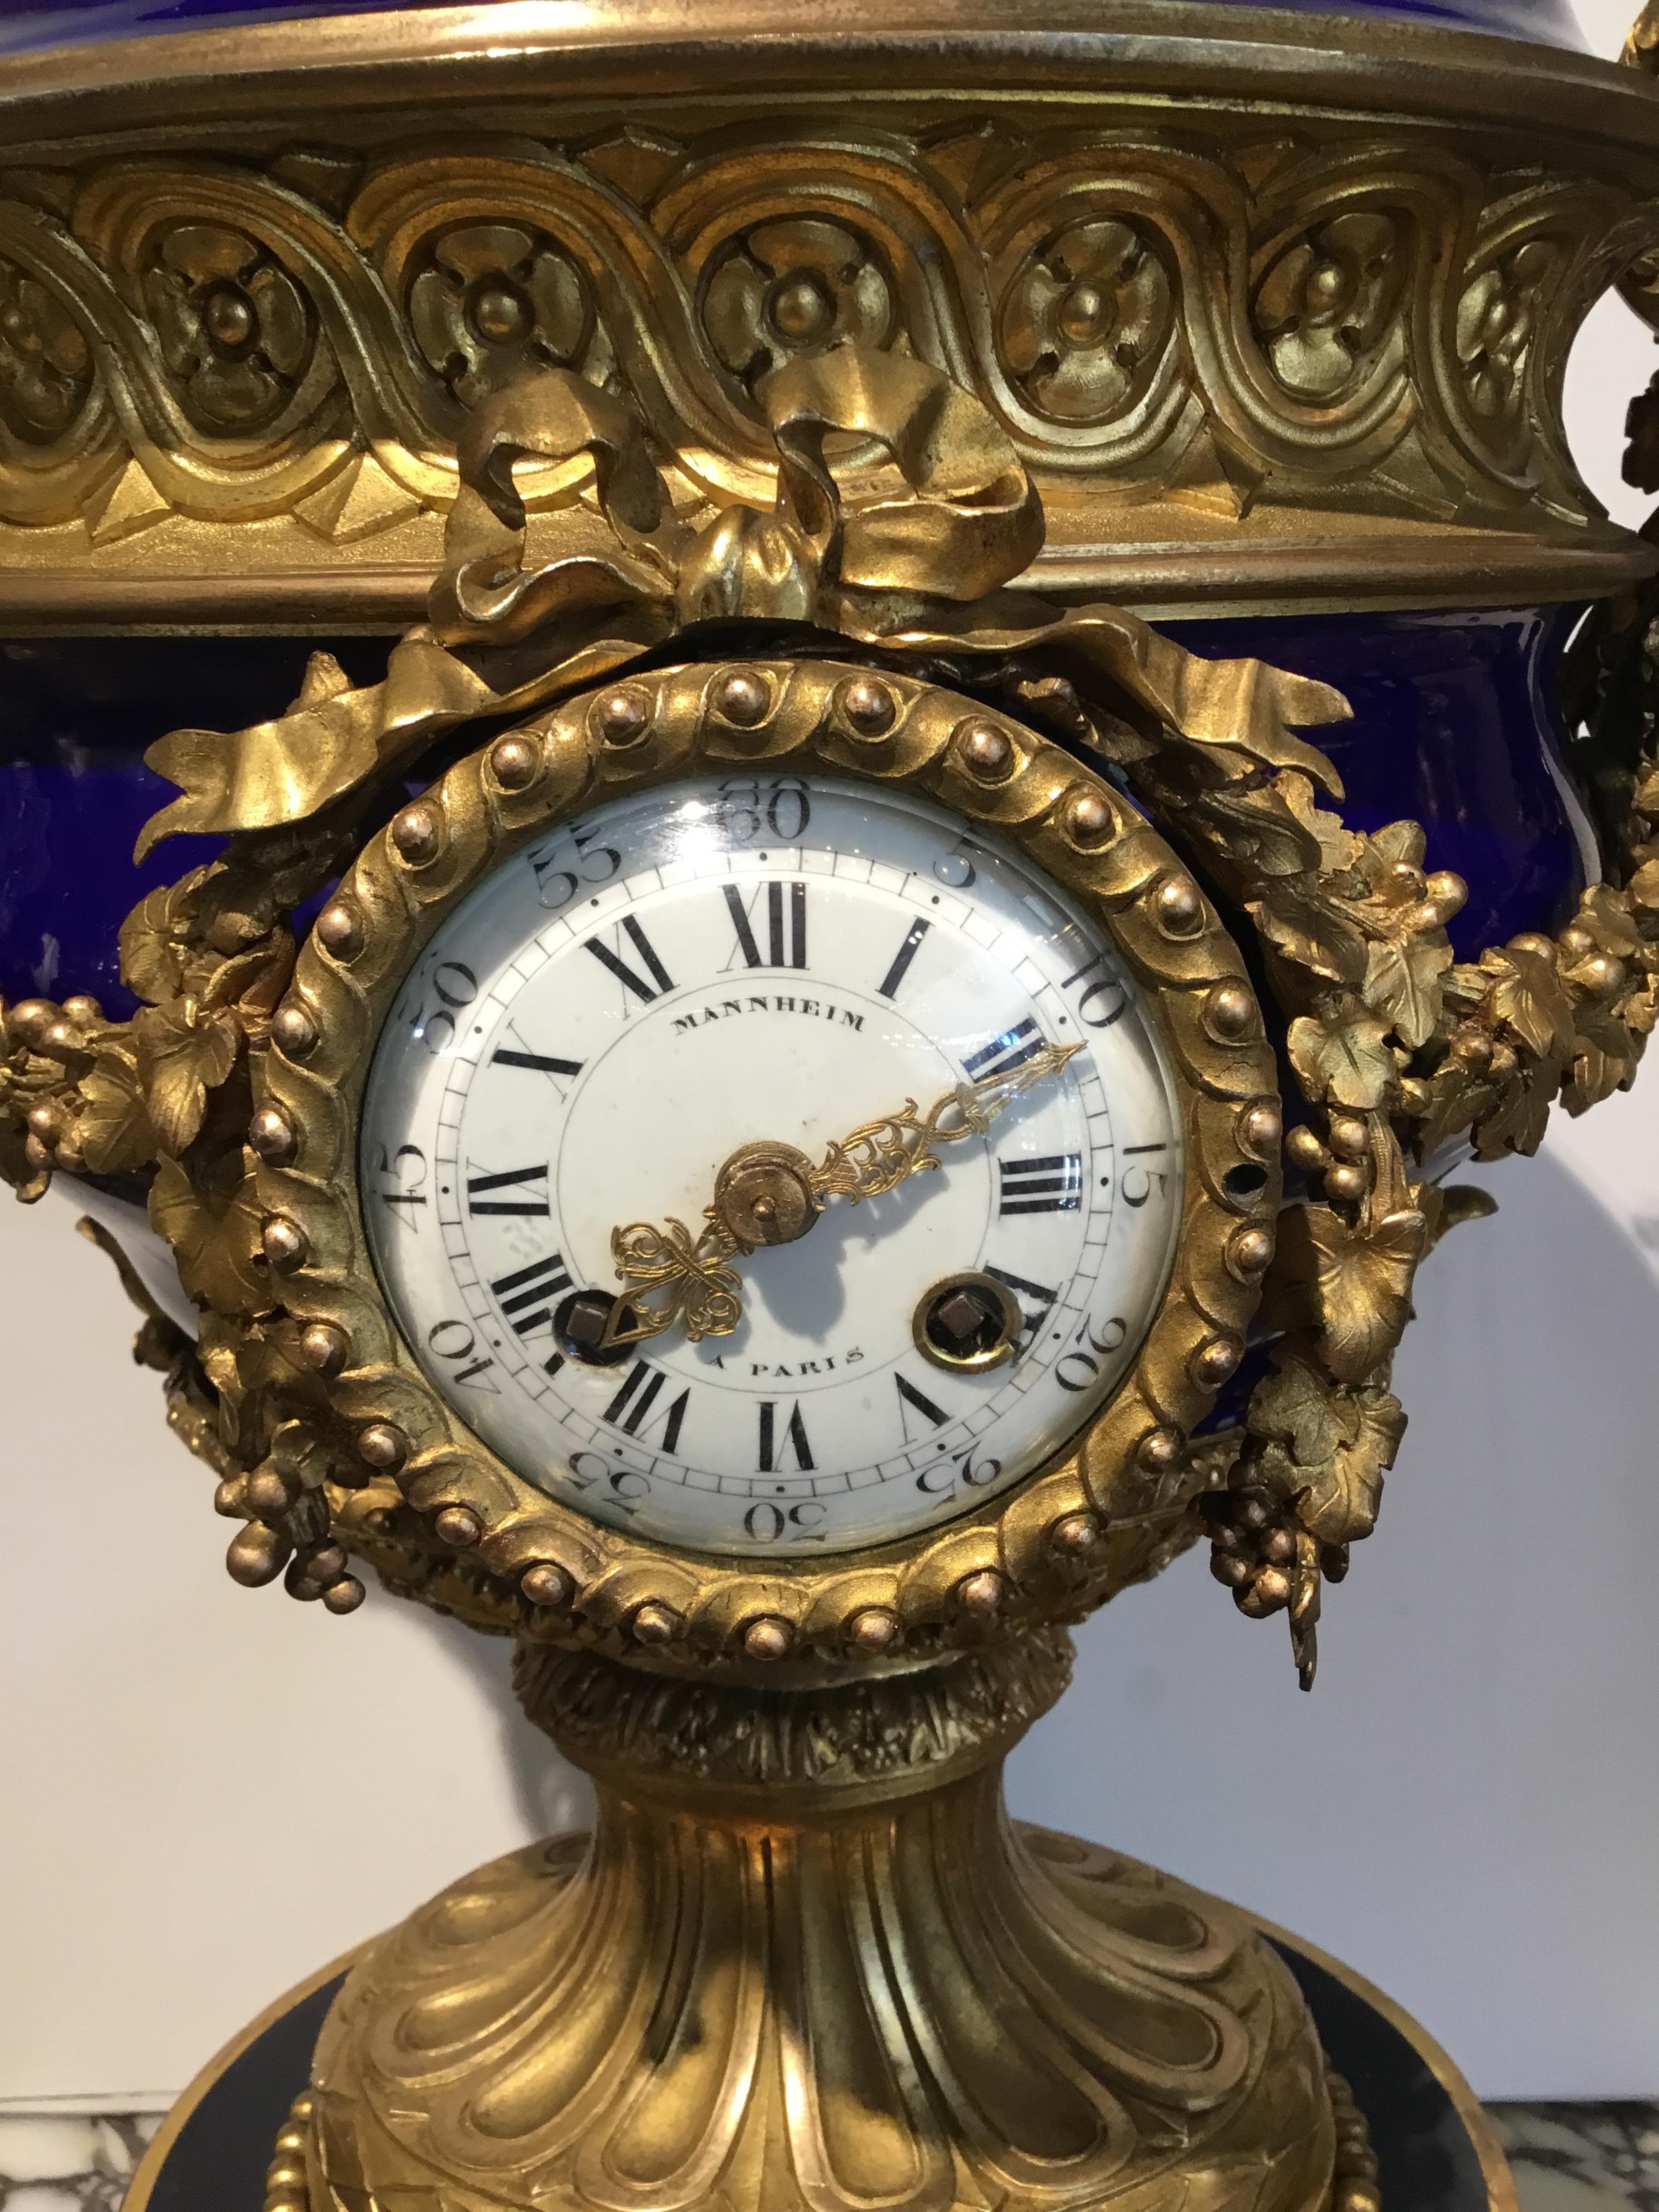 Large and exquisite urn form clock with cobalt porcelain and gilt bronze
Mounts. Signed on face Mannheim Paris. Pomegranate finial at the crest.
Scrolling arms to each side in grape leaf motif. Urn is resting on a circular
Base on gilt bronze.